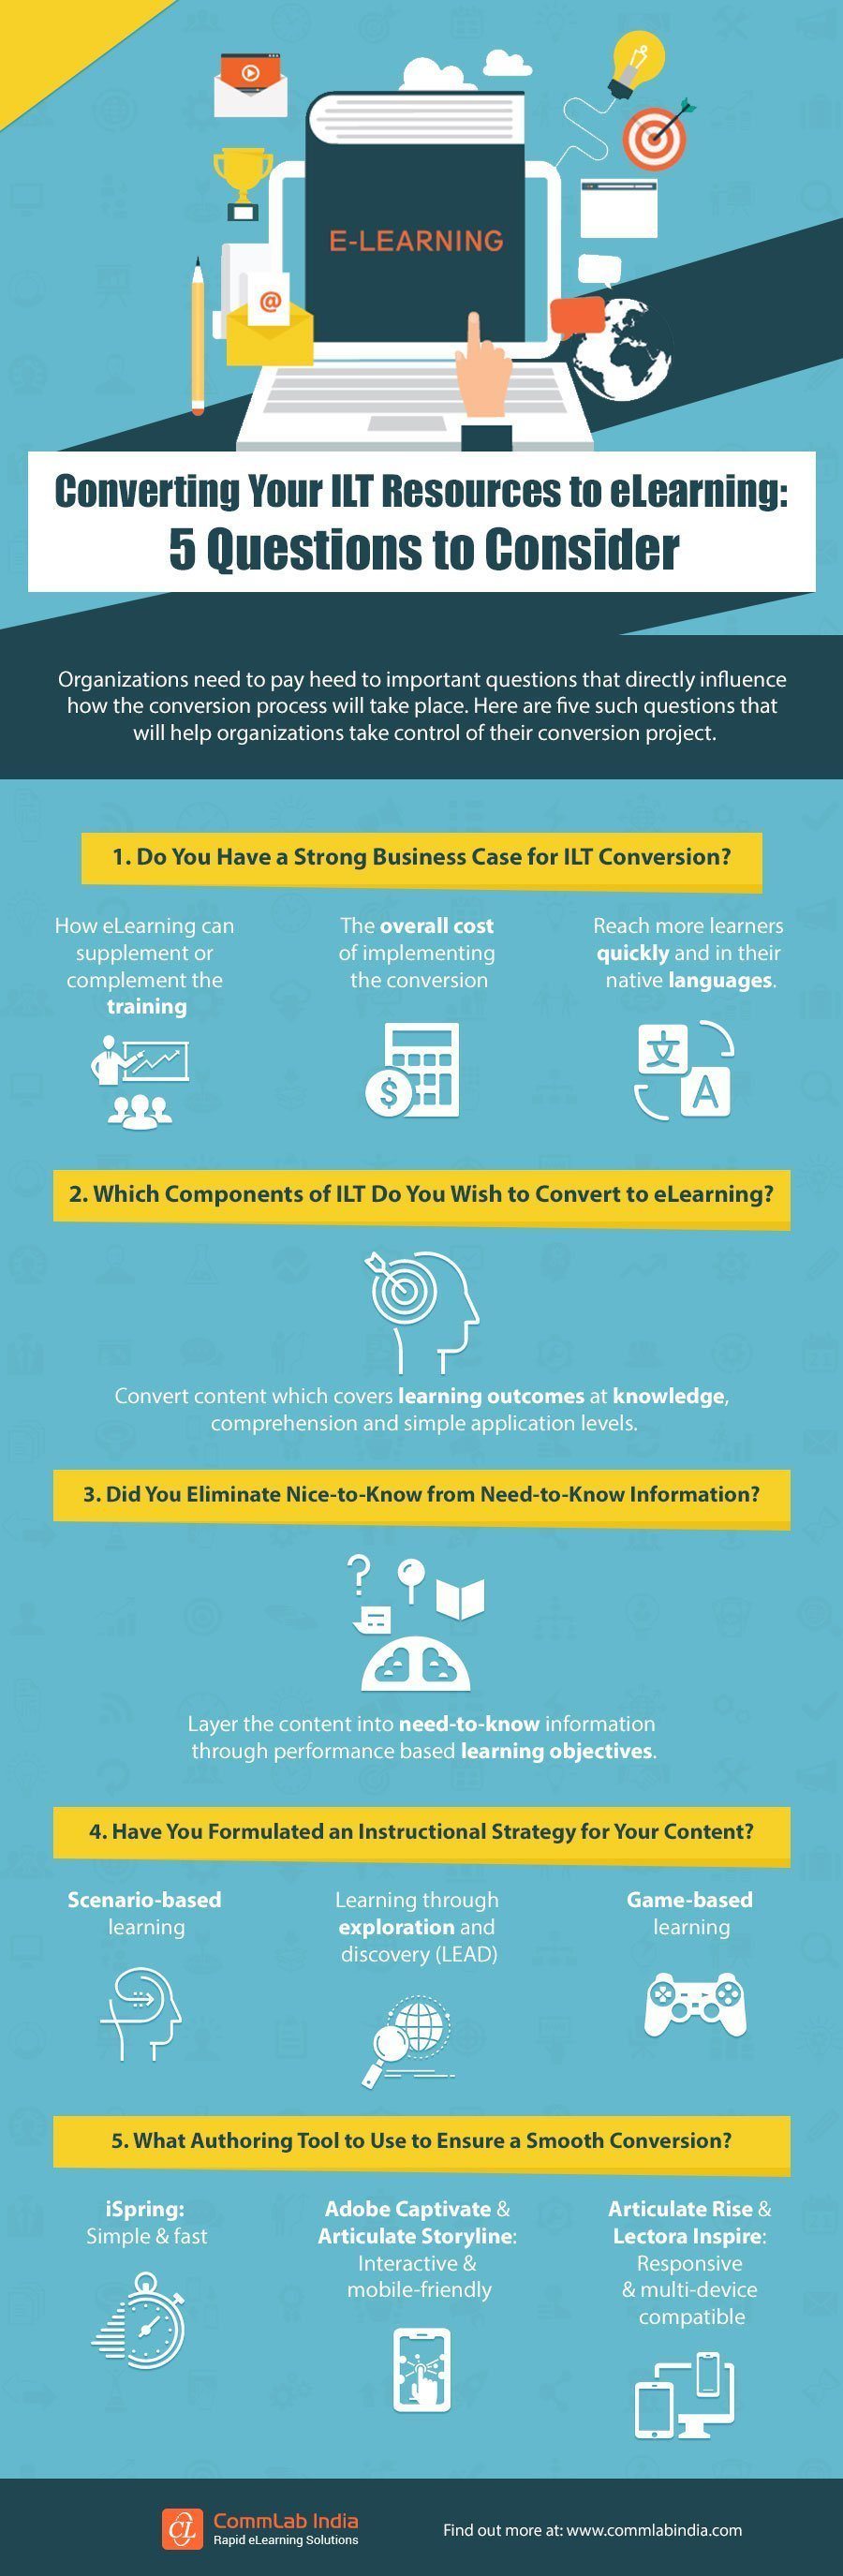 Converting Your ILT Resources to eLearning: 5 Questions to Consider